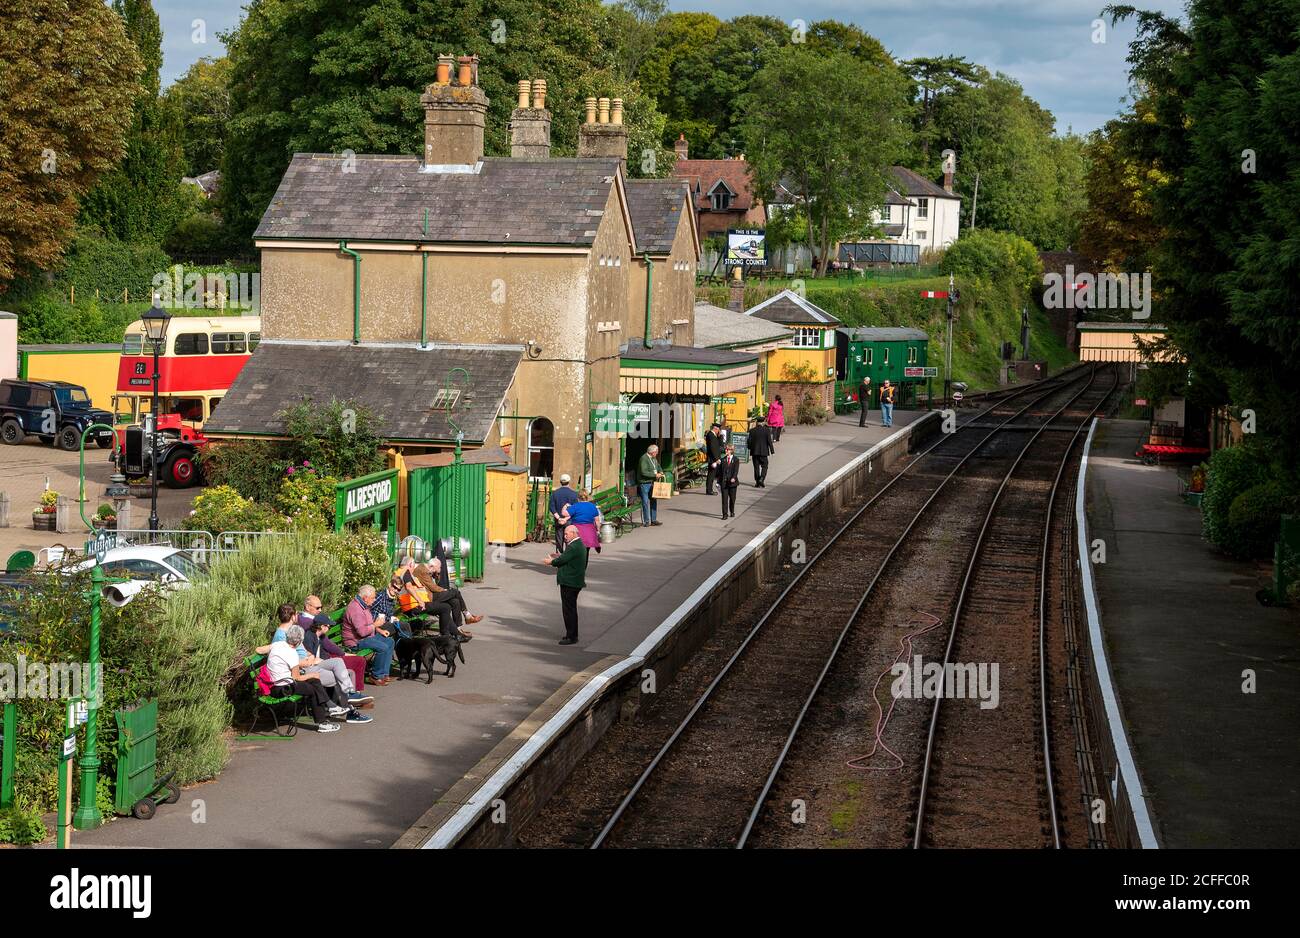 Alresford, Hampshire, England, UK. 2020. Passengers wait on the platform for a train at Alresford Station on the Watercress Line in Hampshire, UK Stock Photo